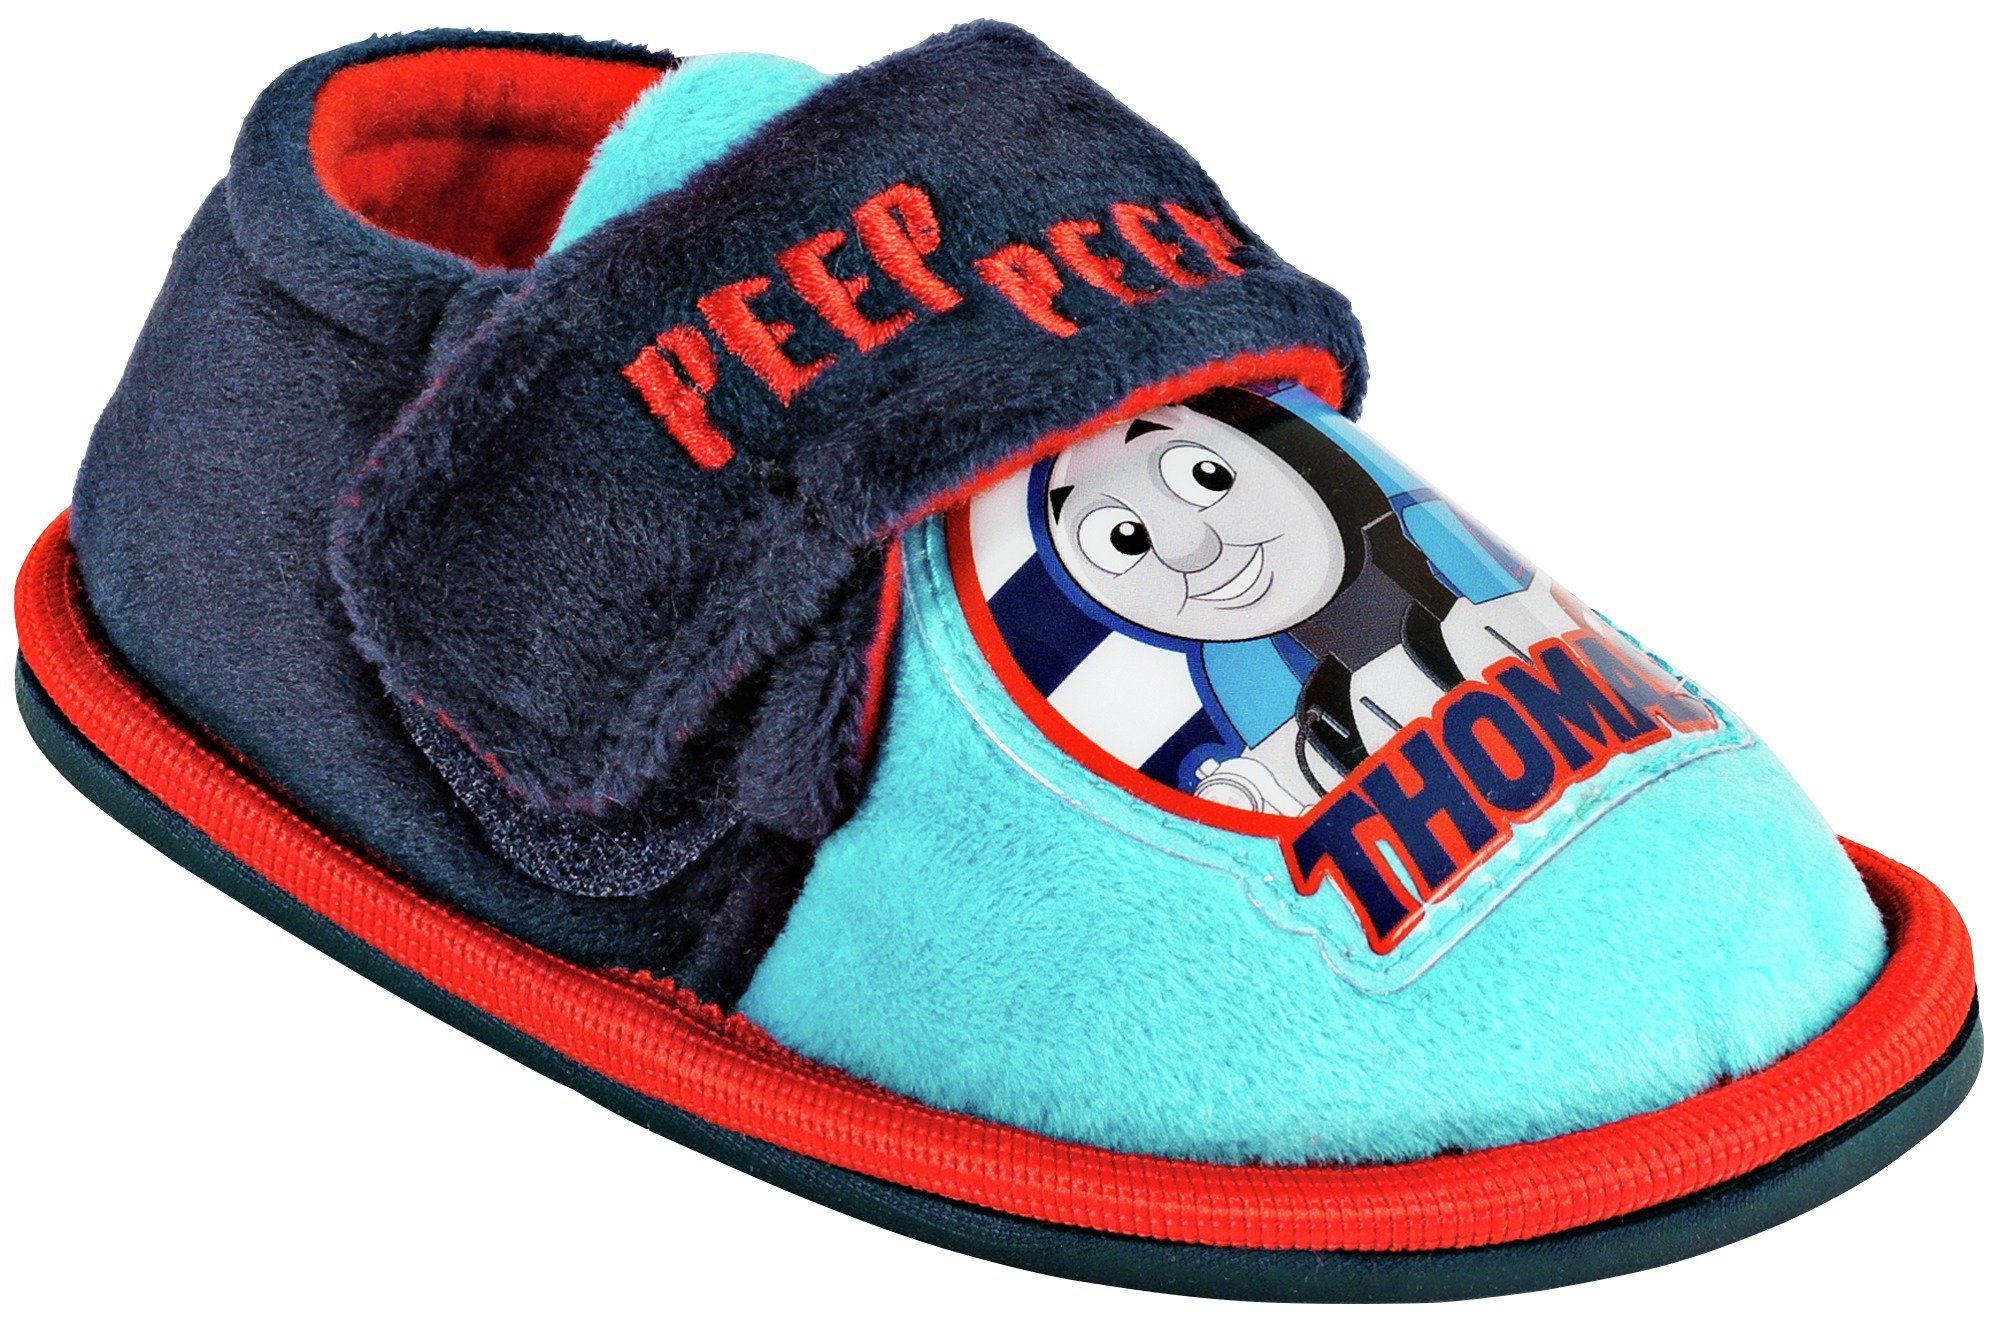 Thomas & Friends Toddle Slippers - Size 7.